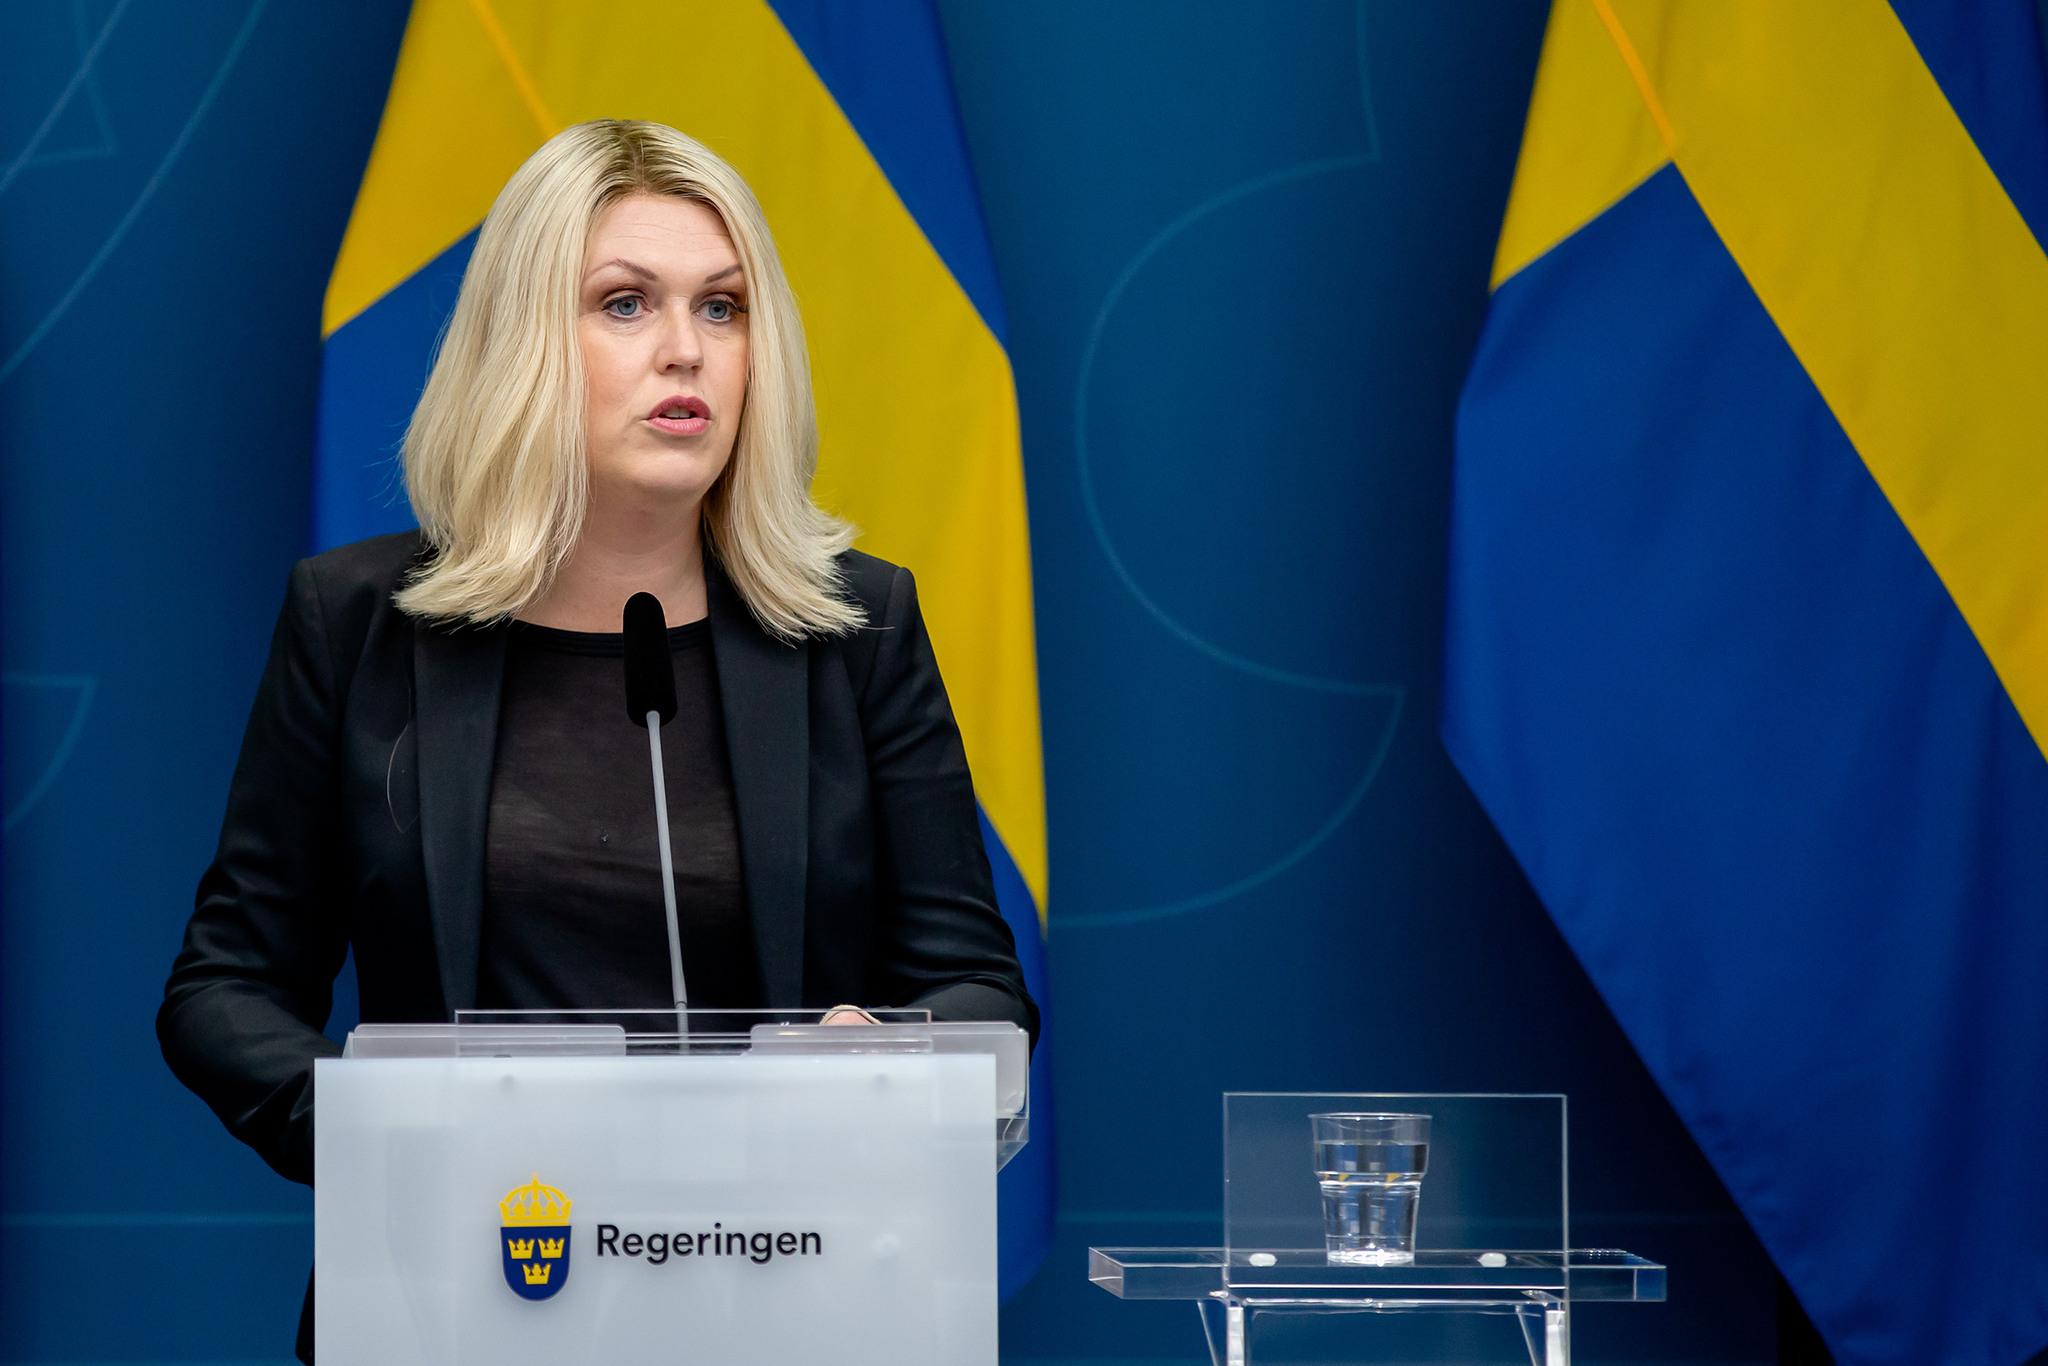 A woman dressed in black, with blonde hair, stading at a podium with a microphone. Swedish flags in the background.